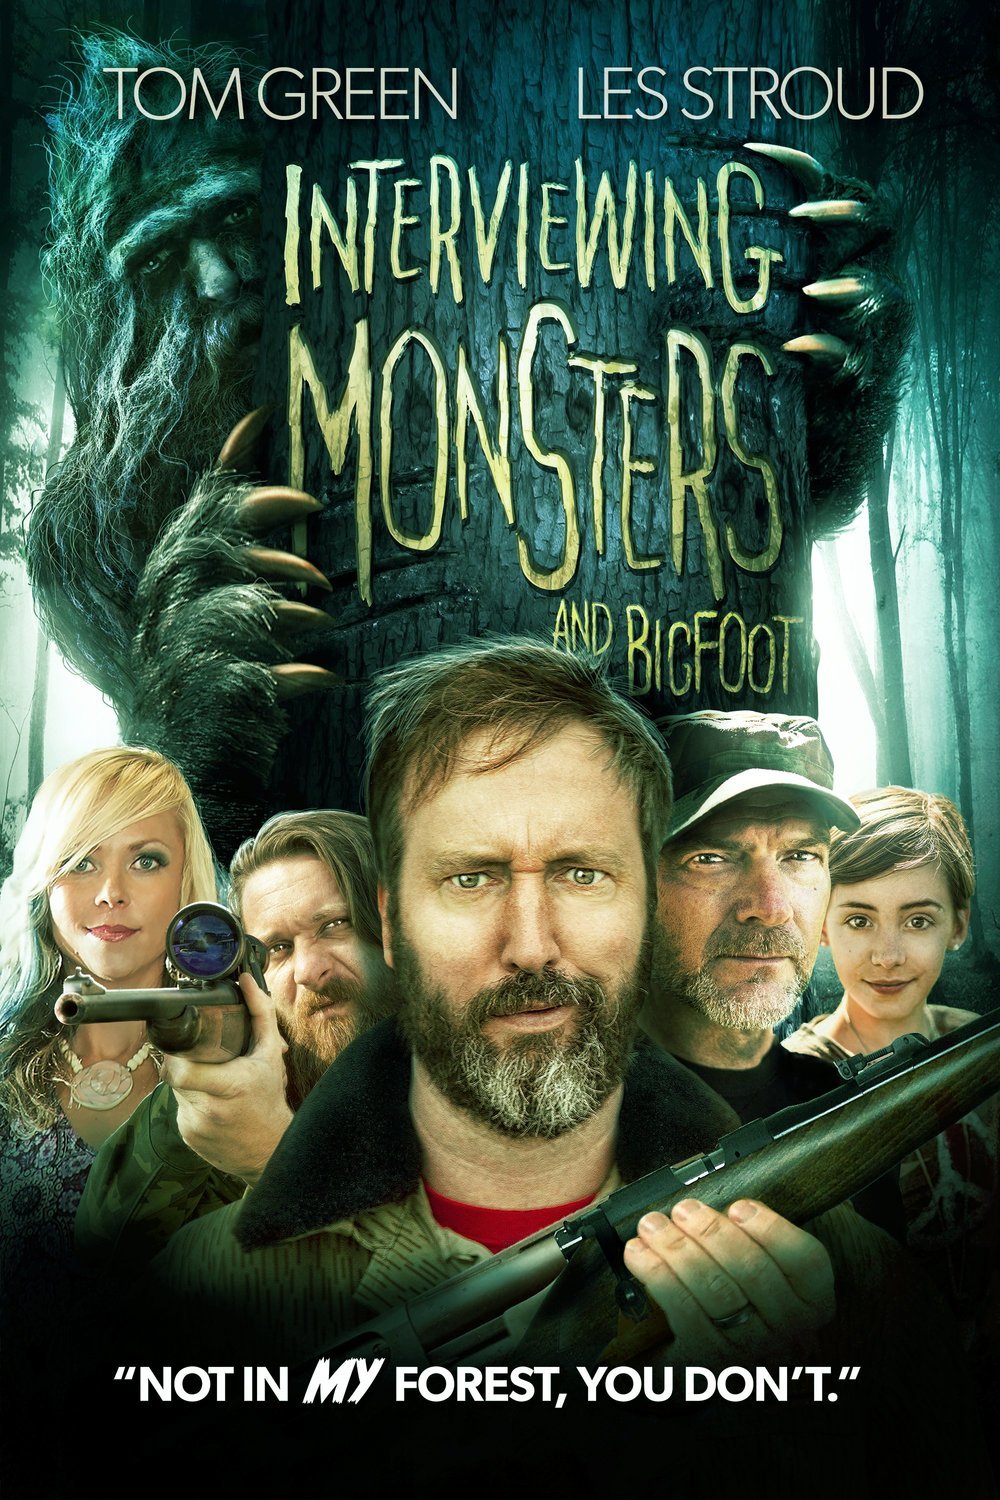 L'affiche du film Interviewing Monsters and Bigfoot